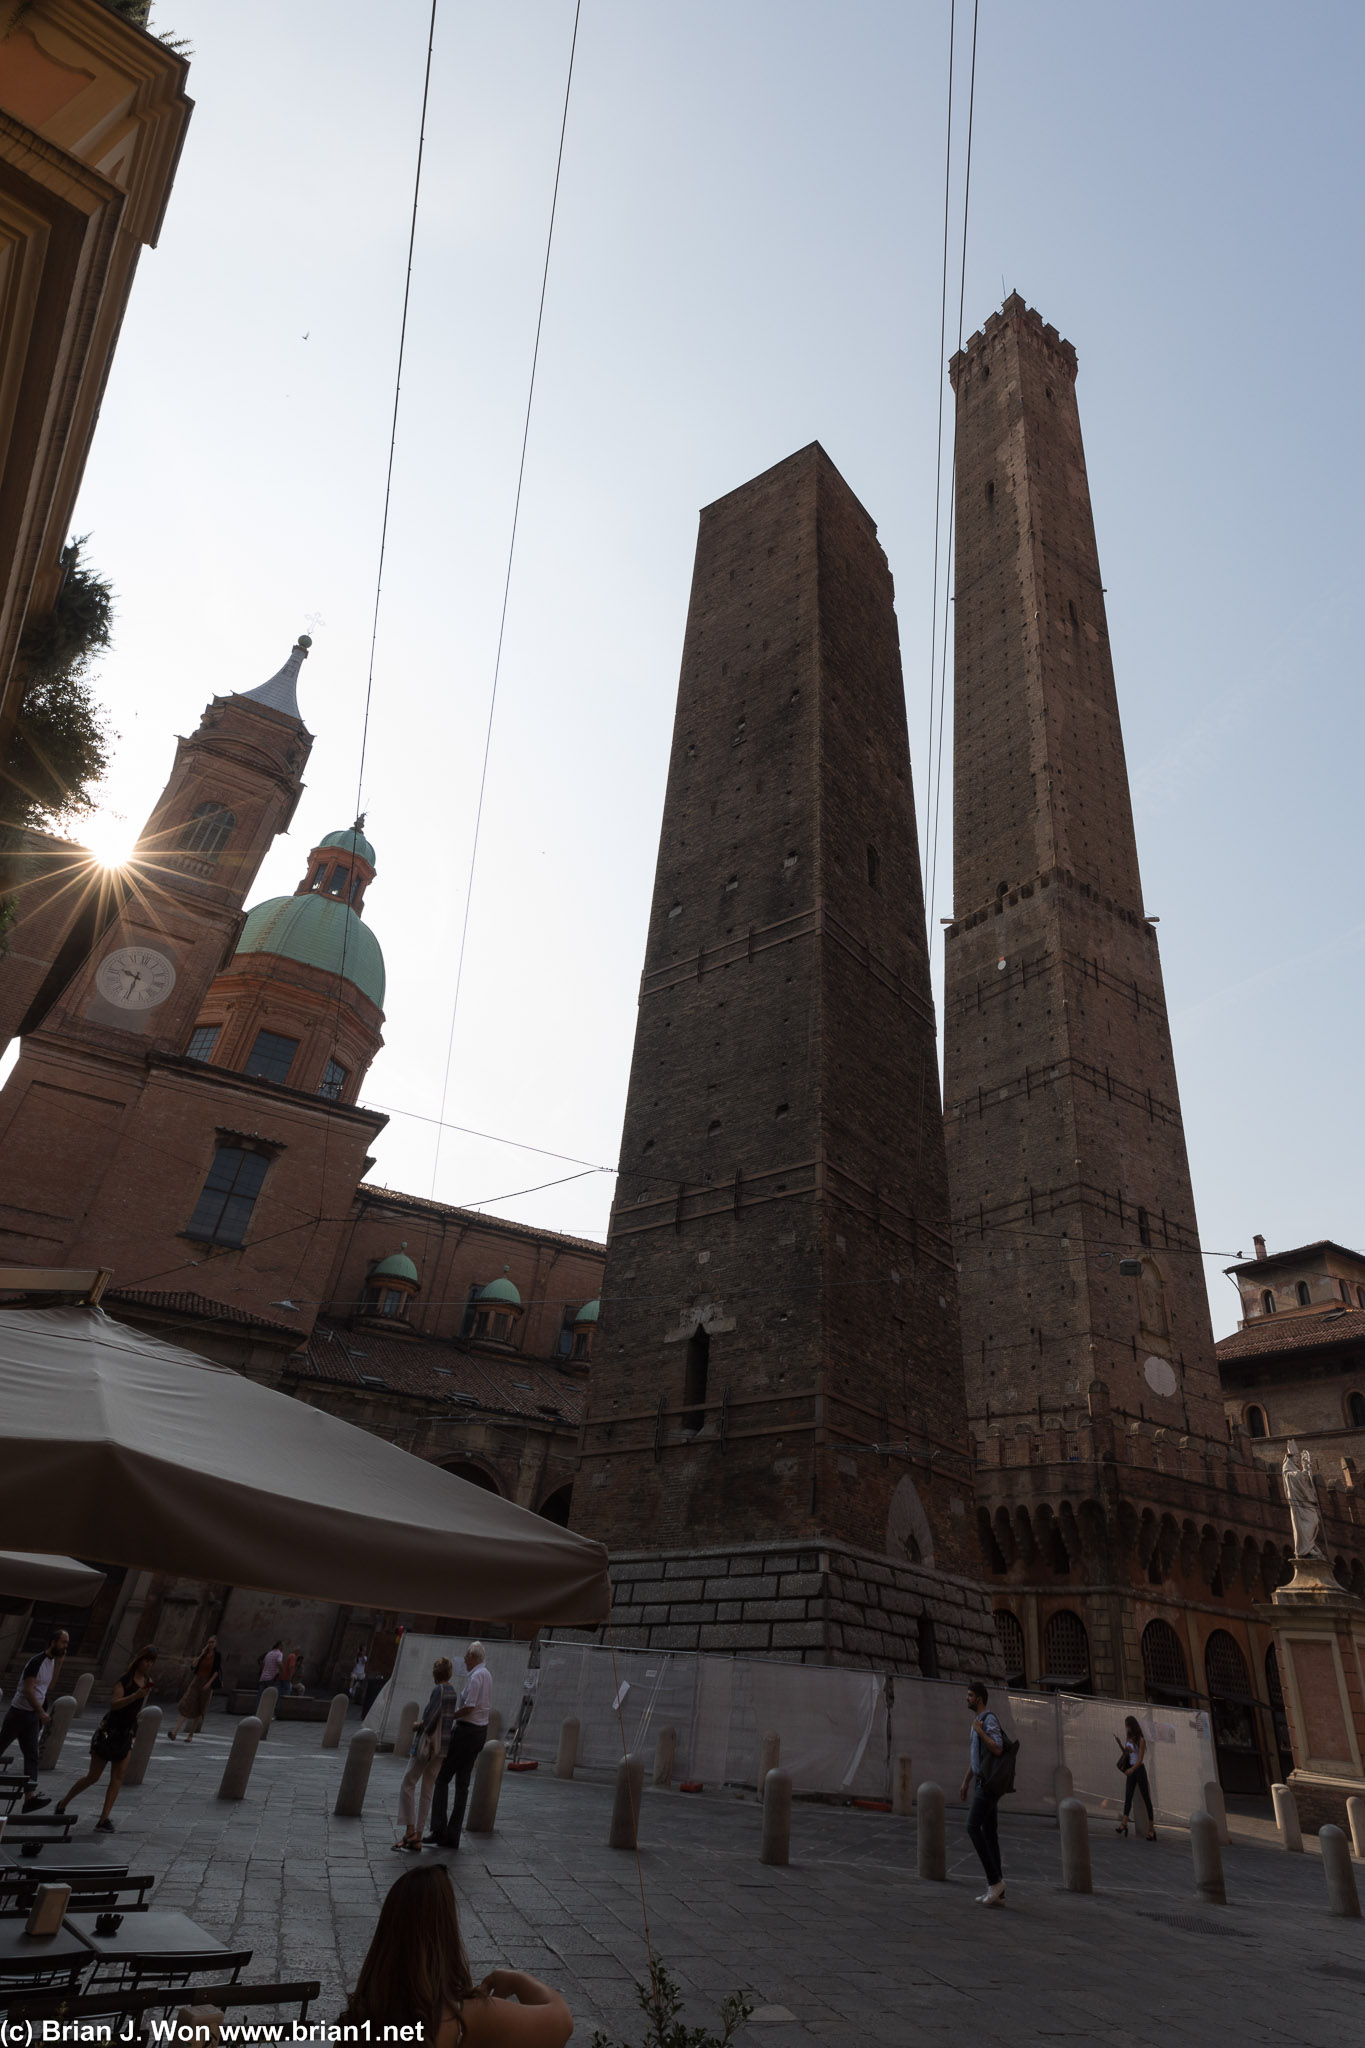 Le Due Torri, the Two Towers of Bologna.